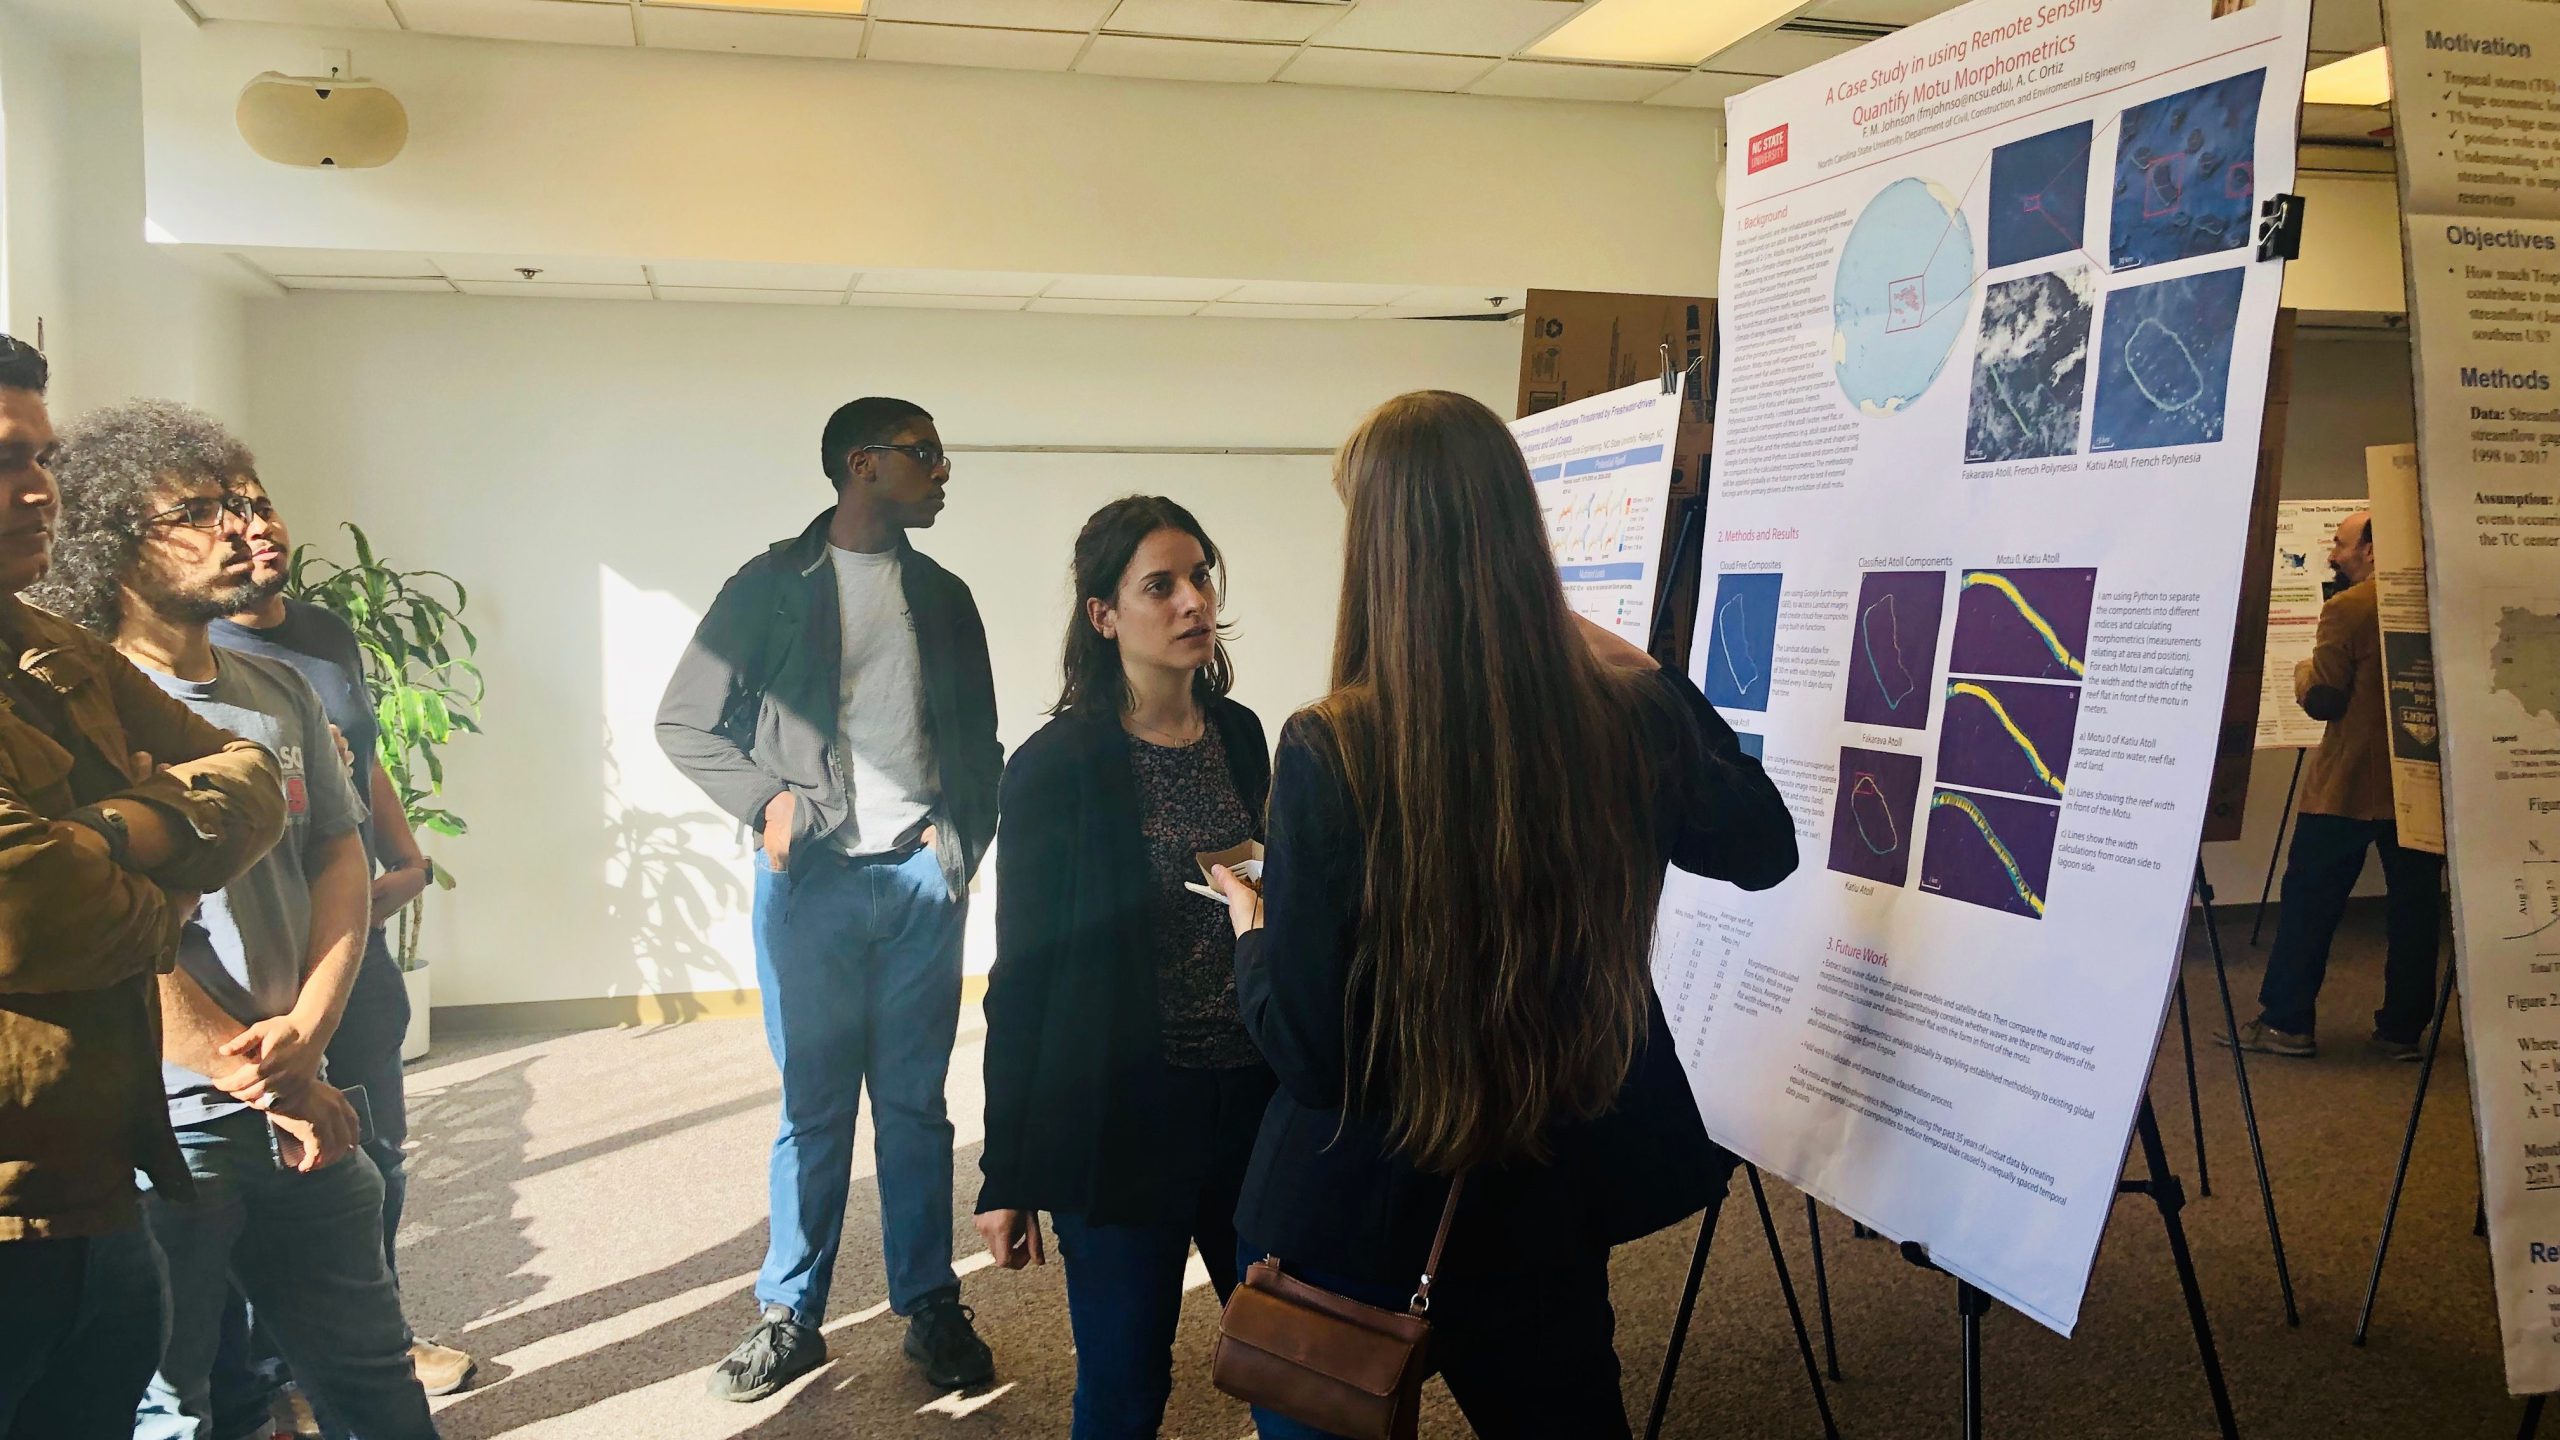 Students discuss a research poster at the RISING Poster Session.